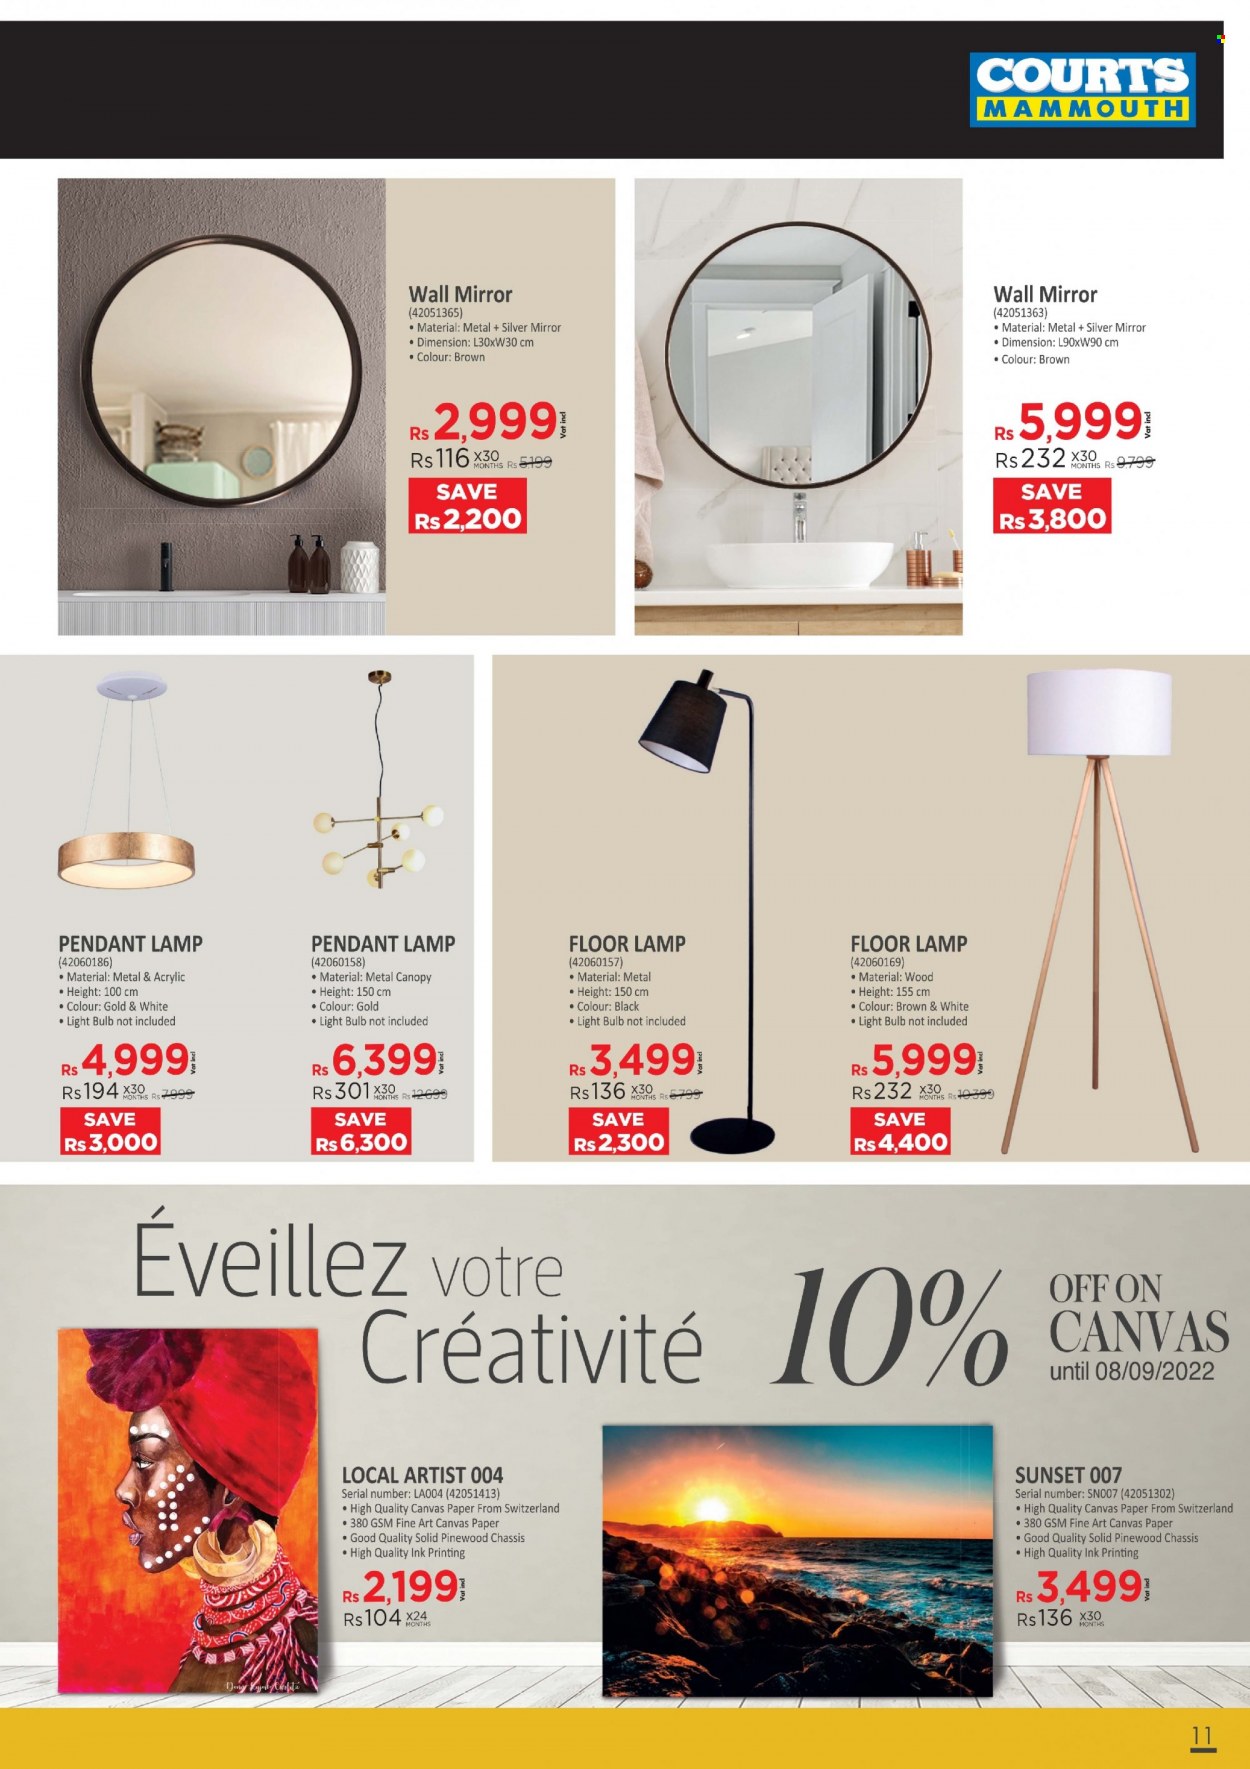 Courts Mammouth Catalogue - 31.08.2022 - 8.09.2022 - Sales products - mirror, lamp, pendant lamp, floor lamp. Page 11.